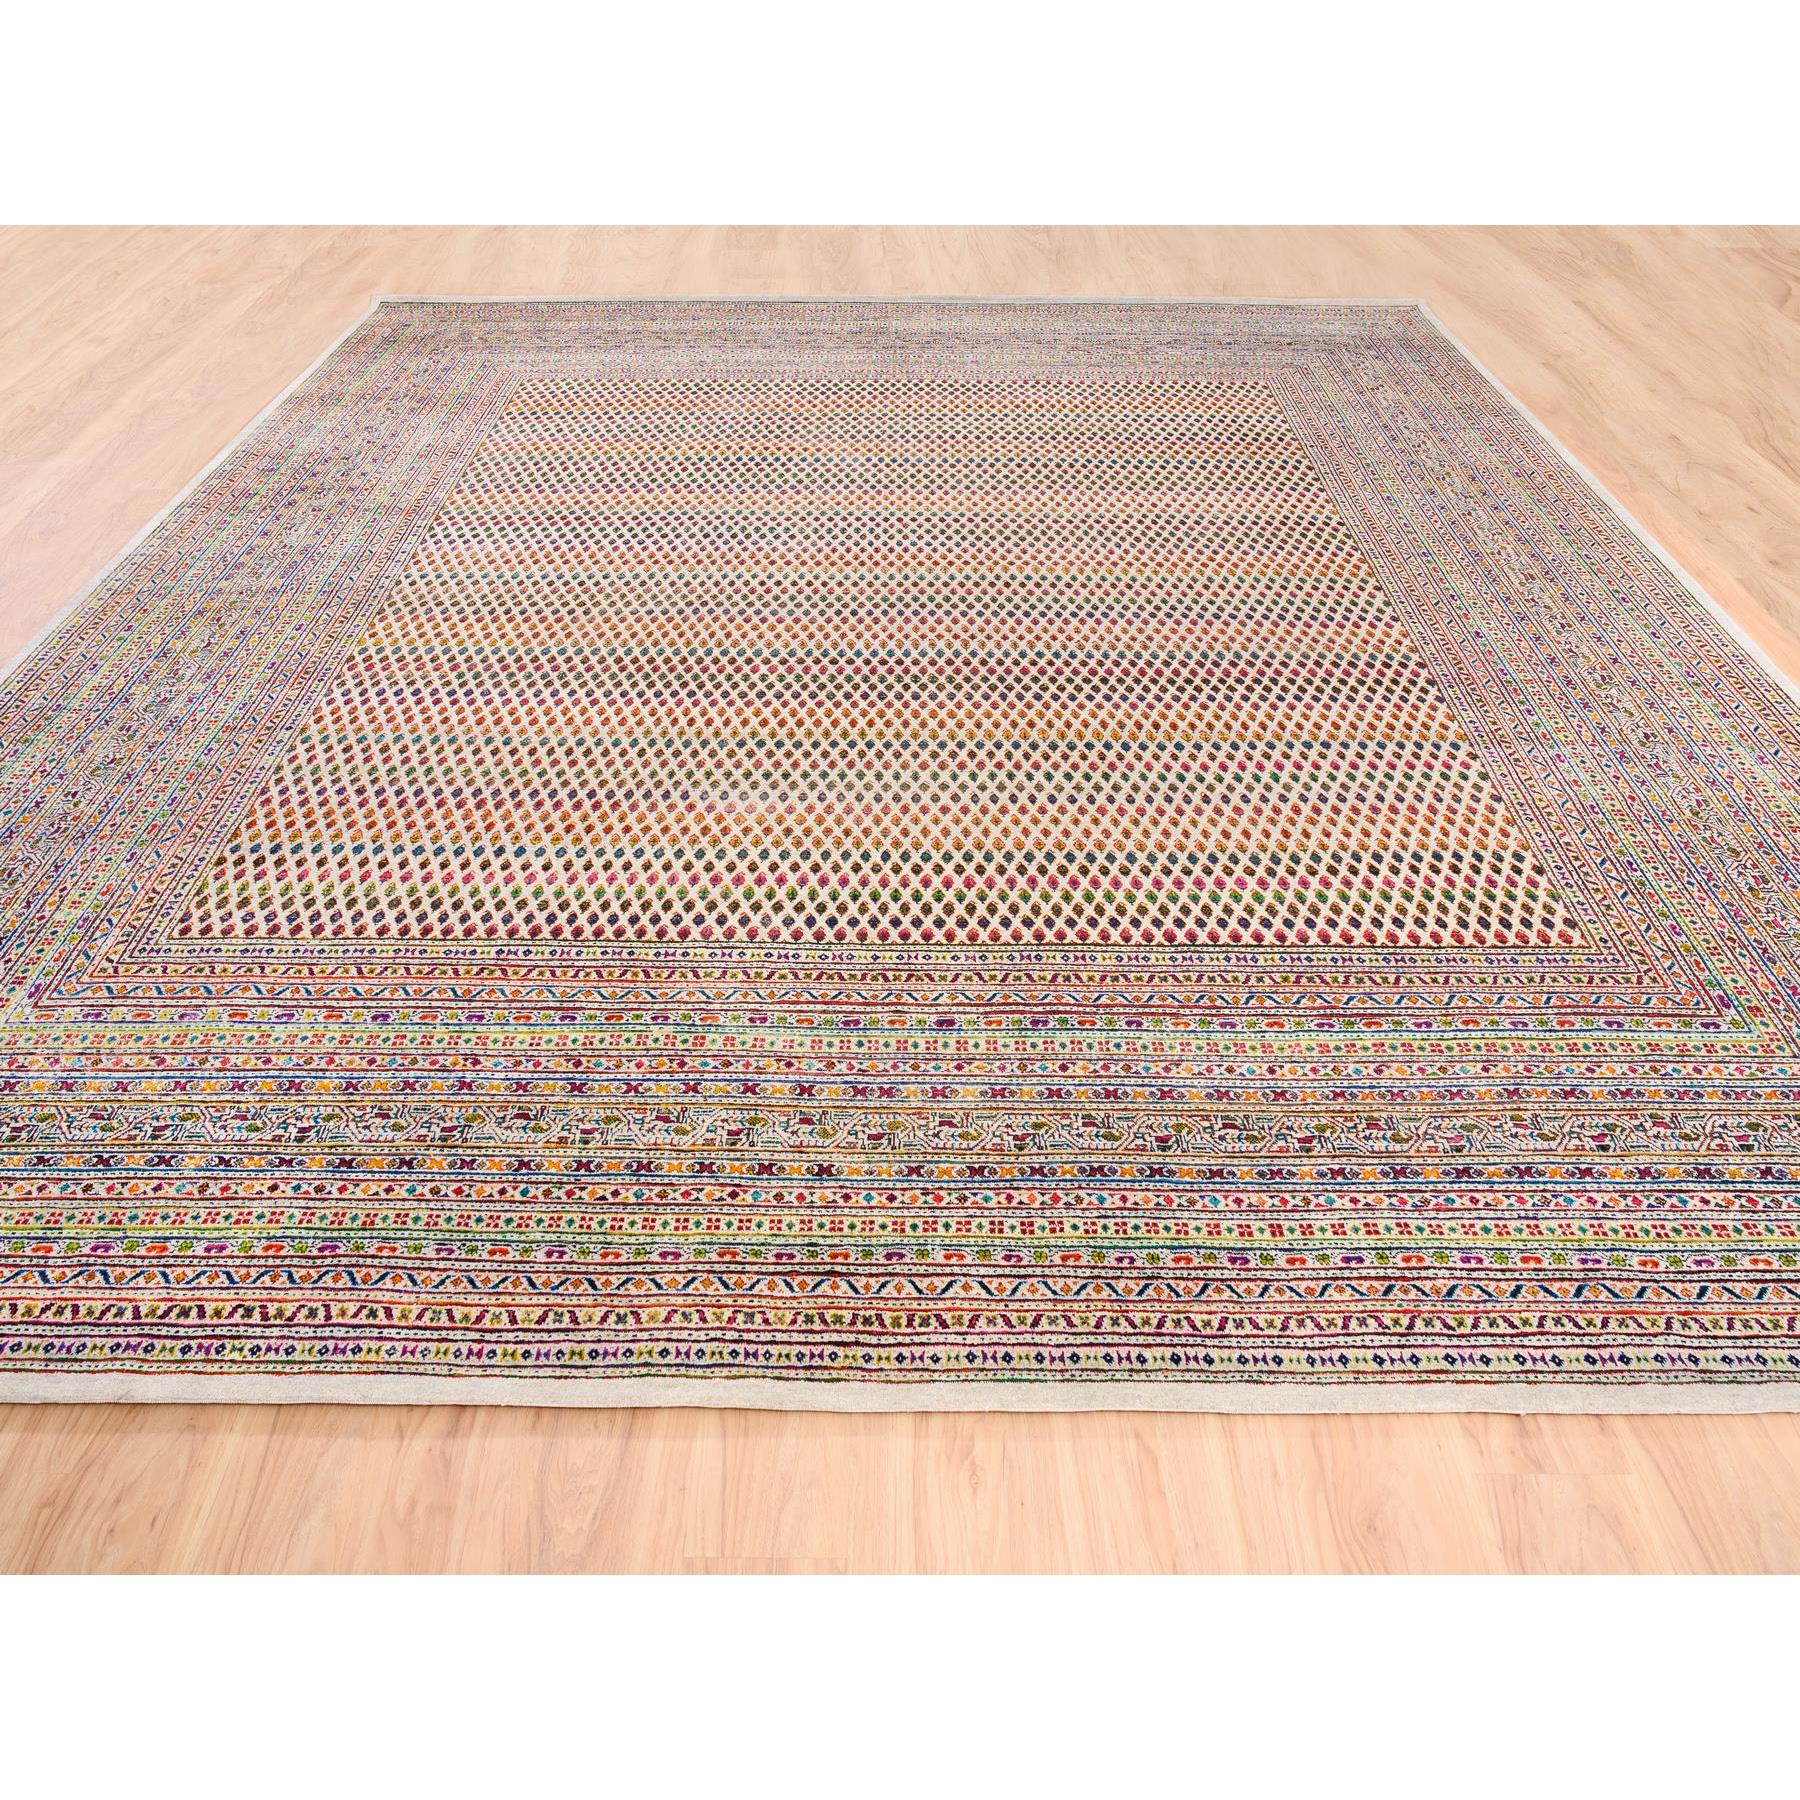 14'x14' Colorful Wool And Sari Silk Sarouk Mir Inspired With Multiple Borders Hand Woven Oriental Square Rug 